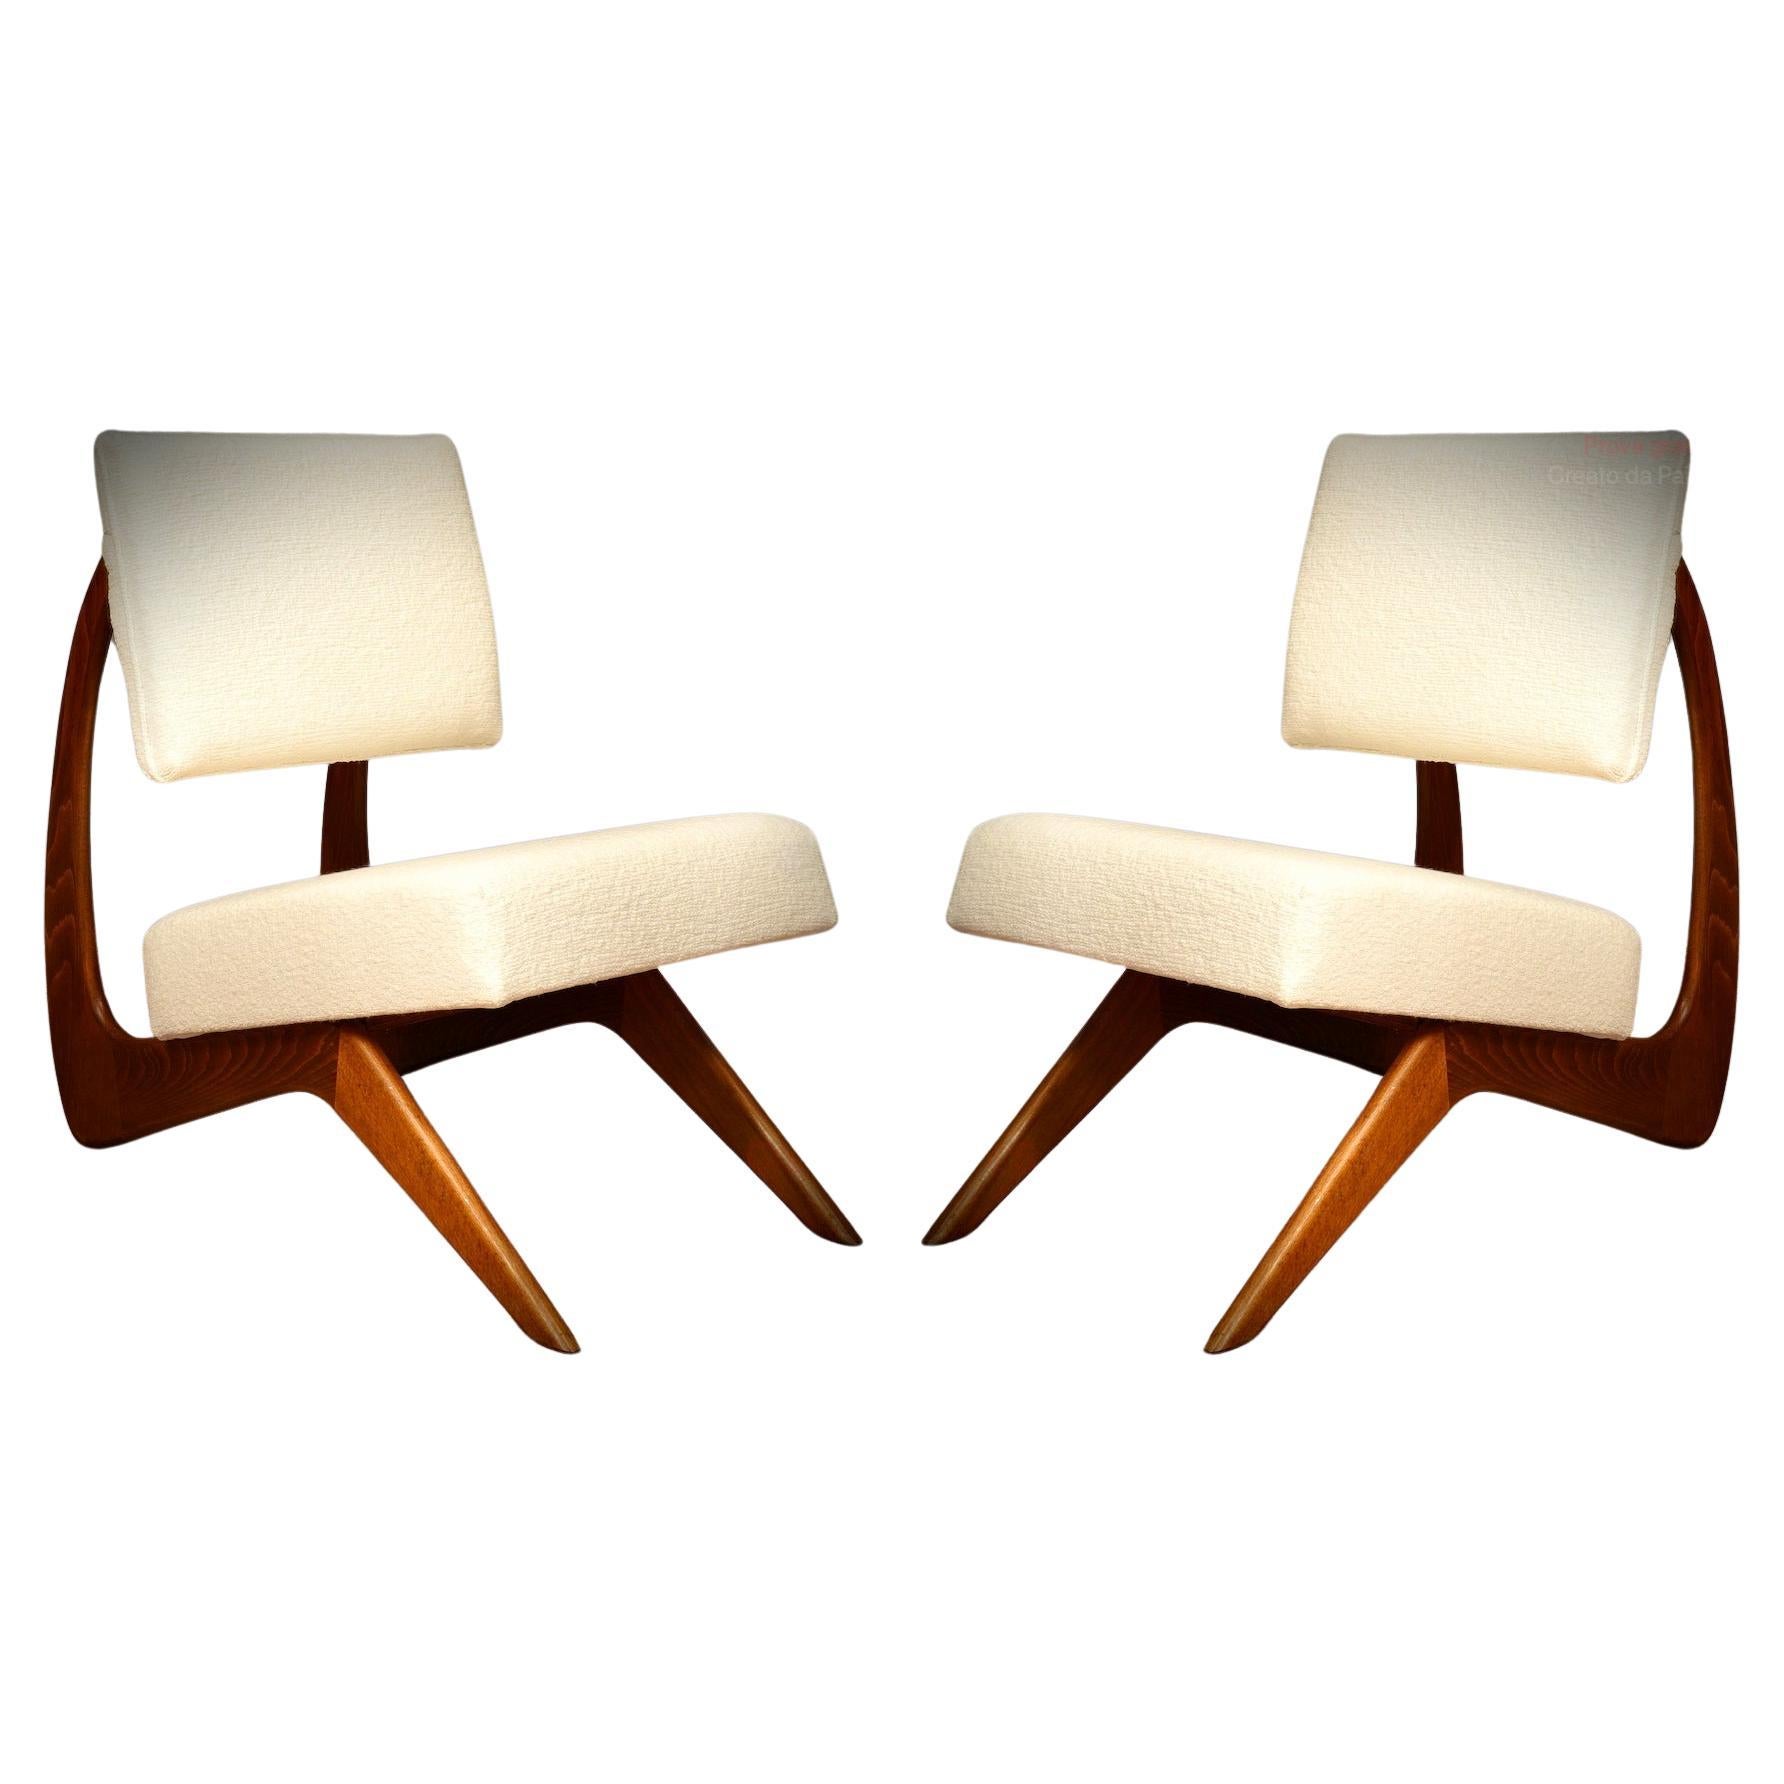 Adrian Pearsall per Craft Associates Mid-Century ArmChairs, 1970 For Sale